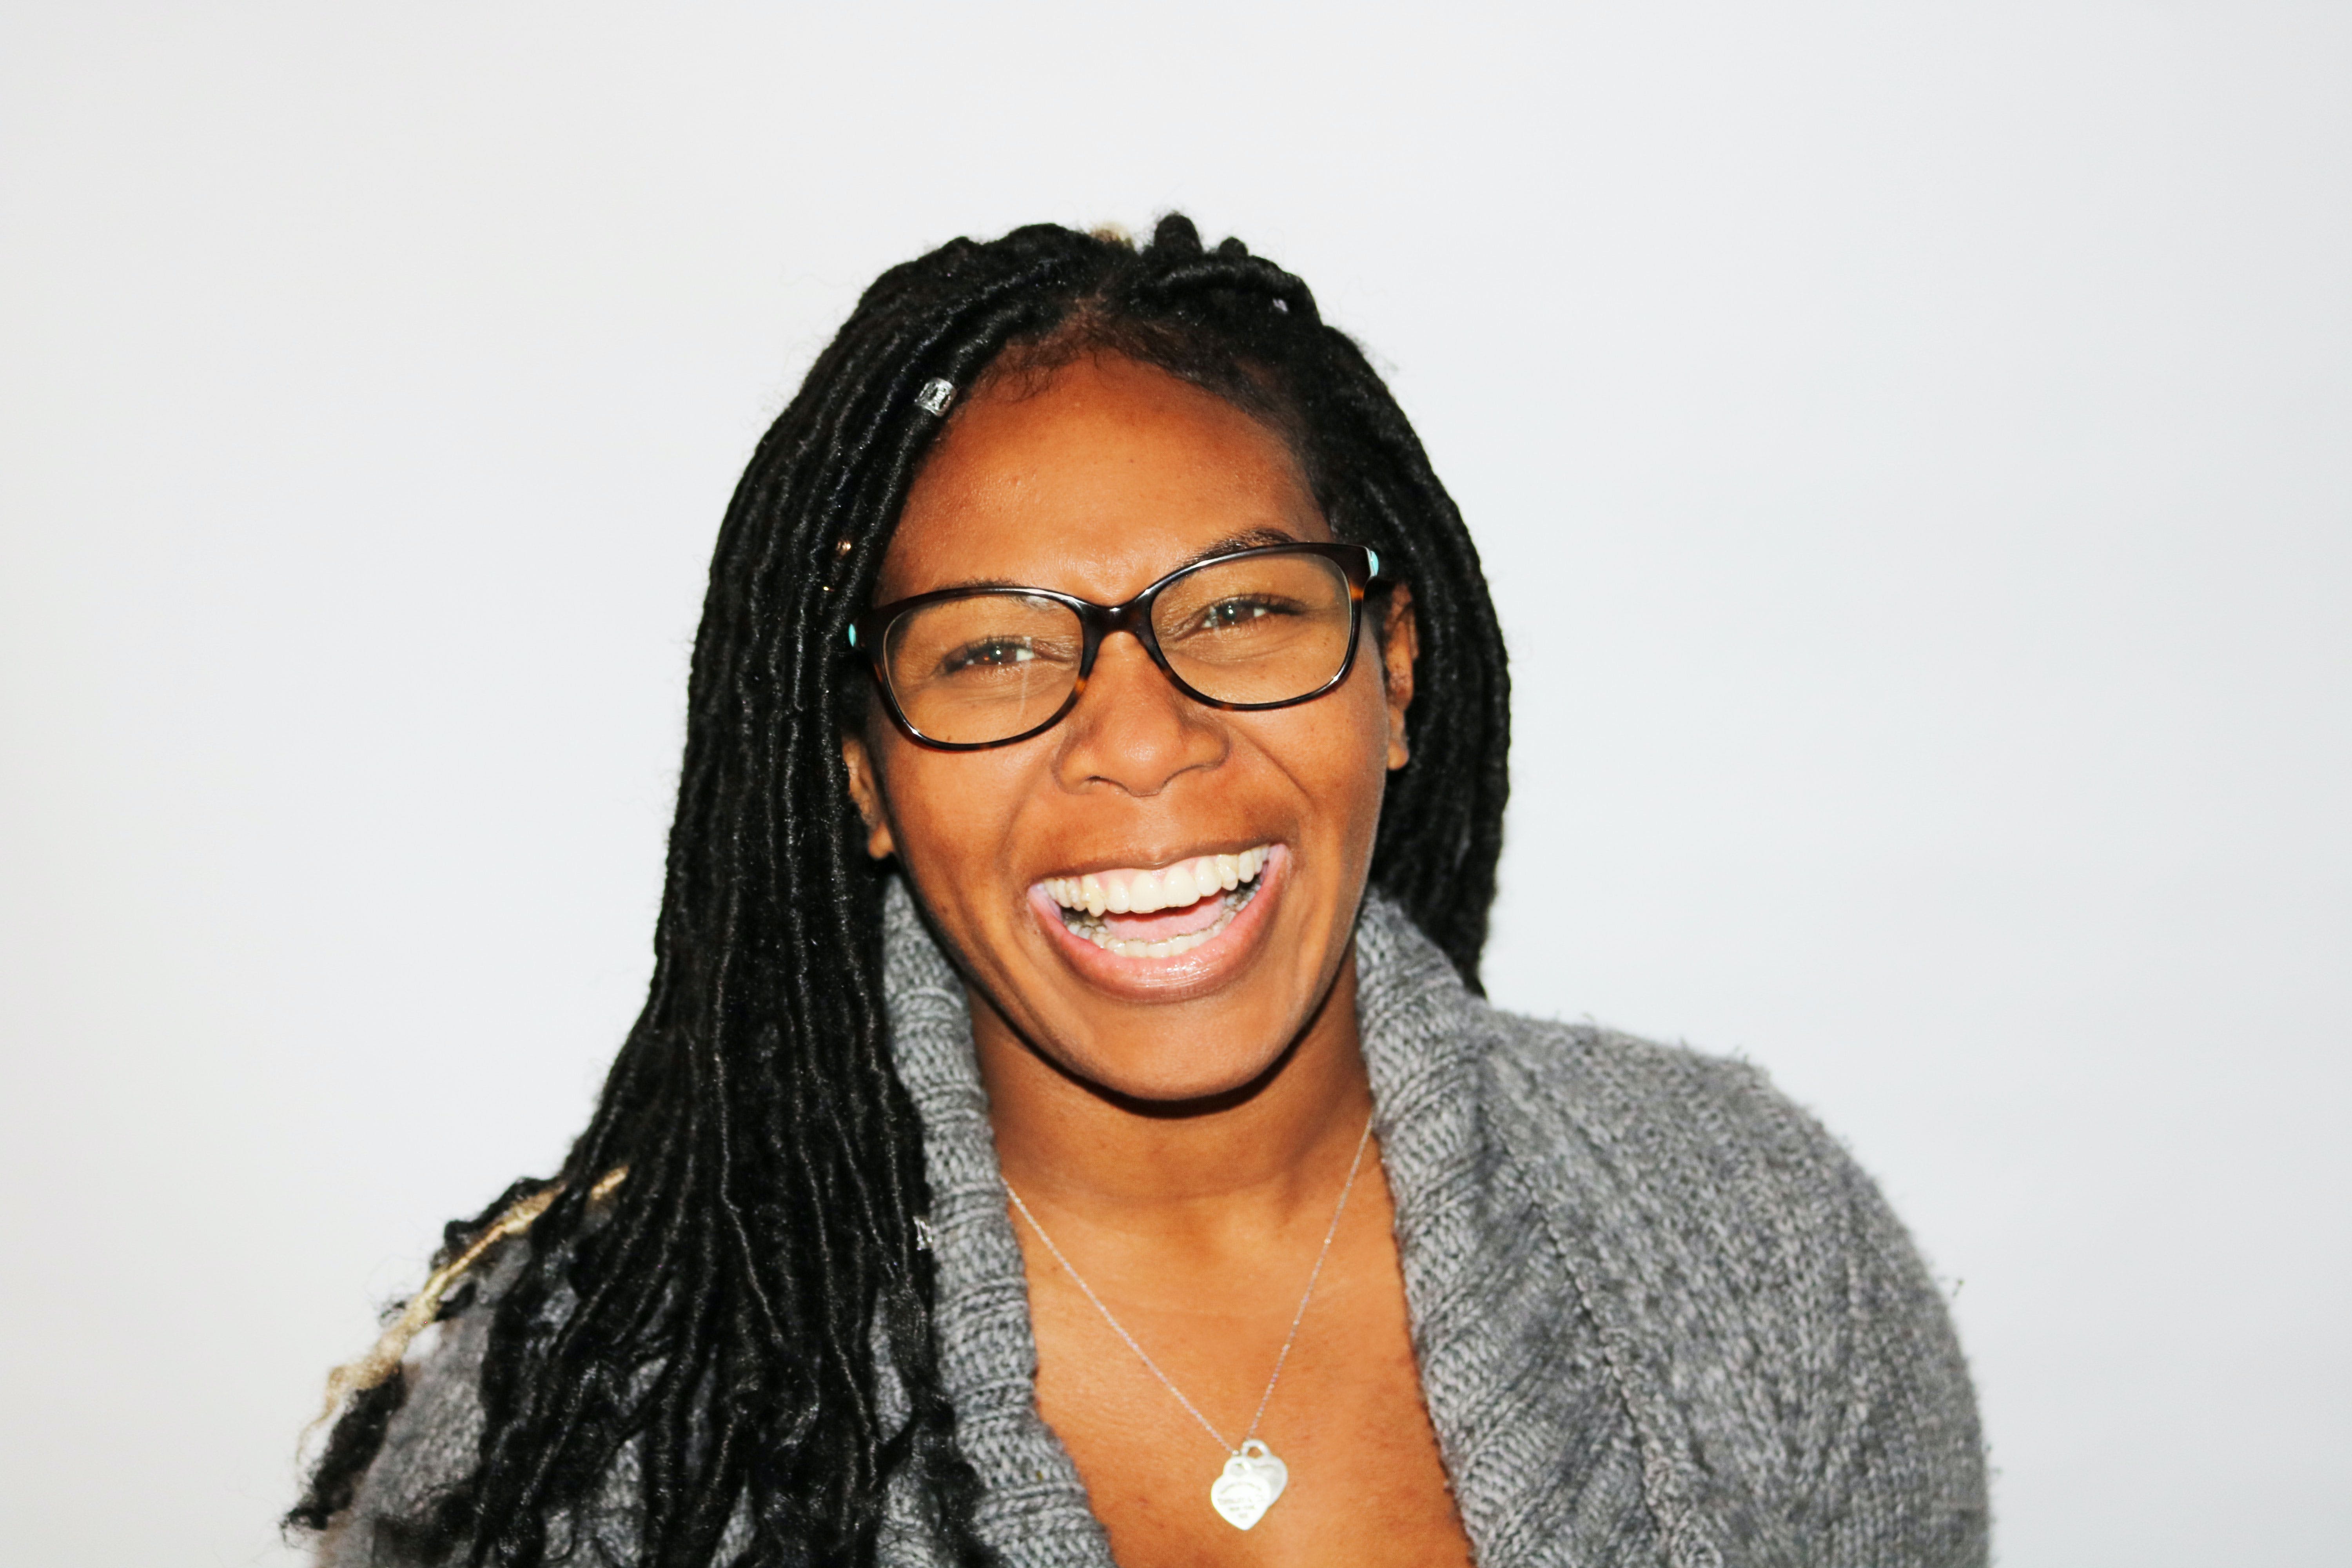 smiling woman wearing eyeglasses and a silver heart pendant necklace